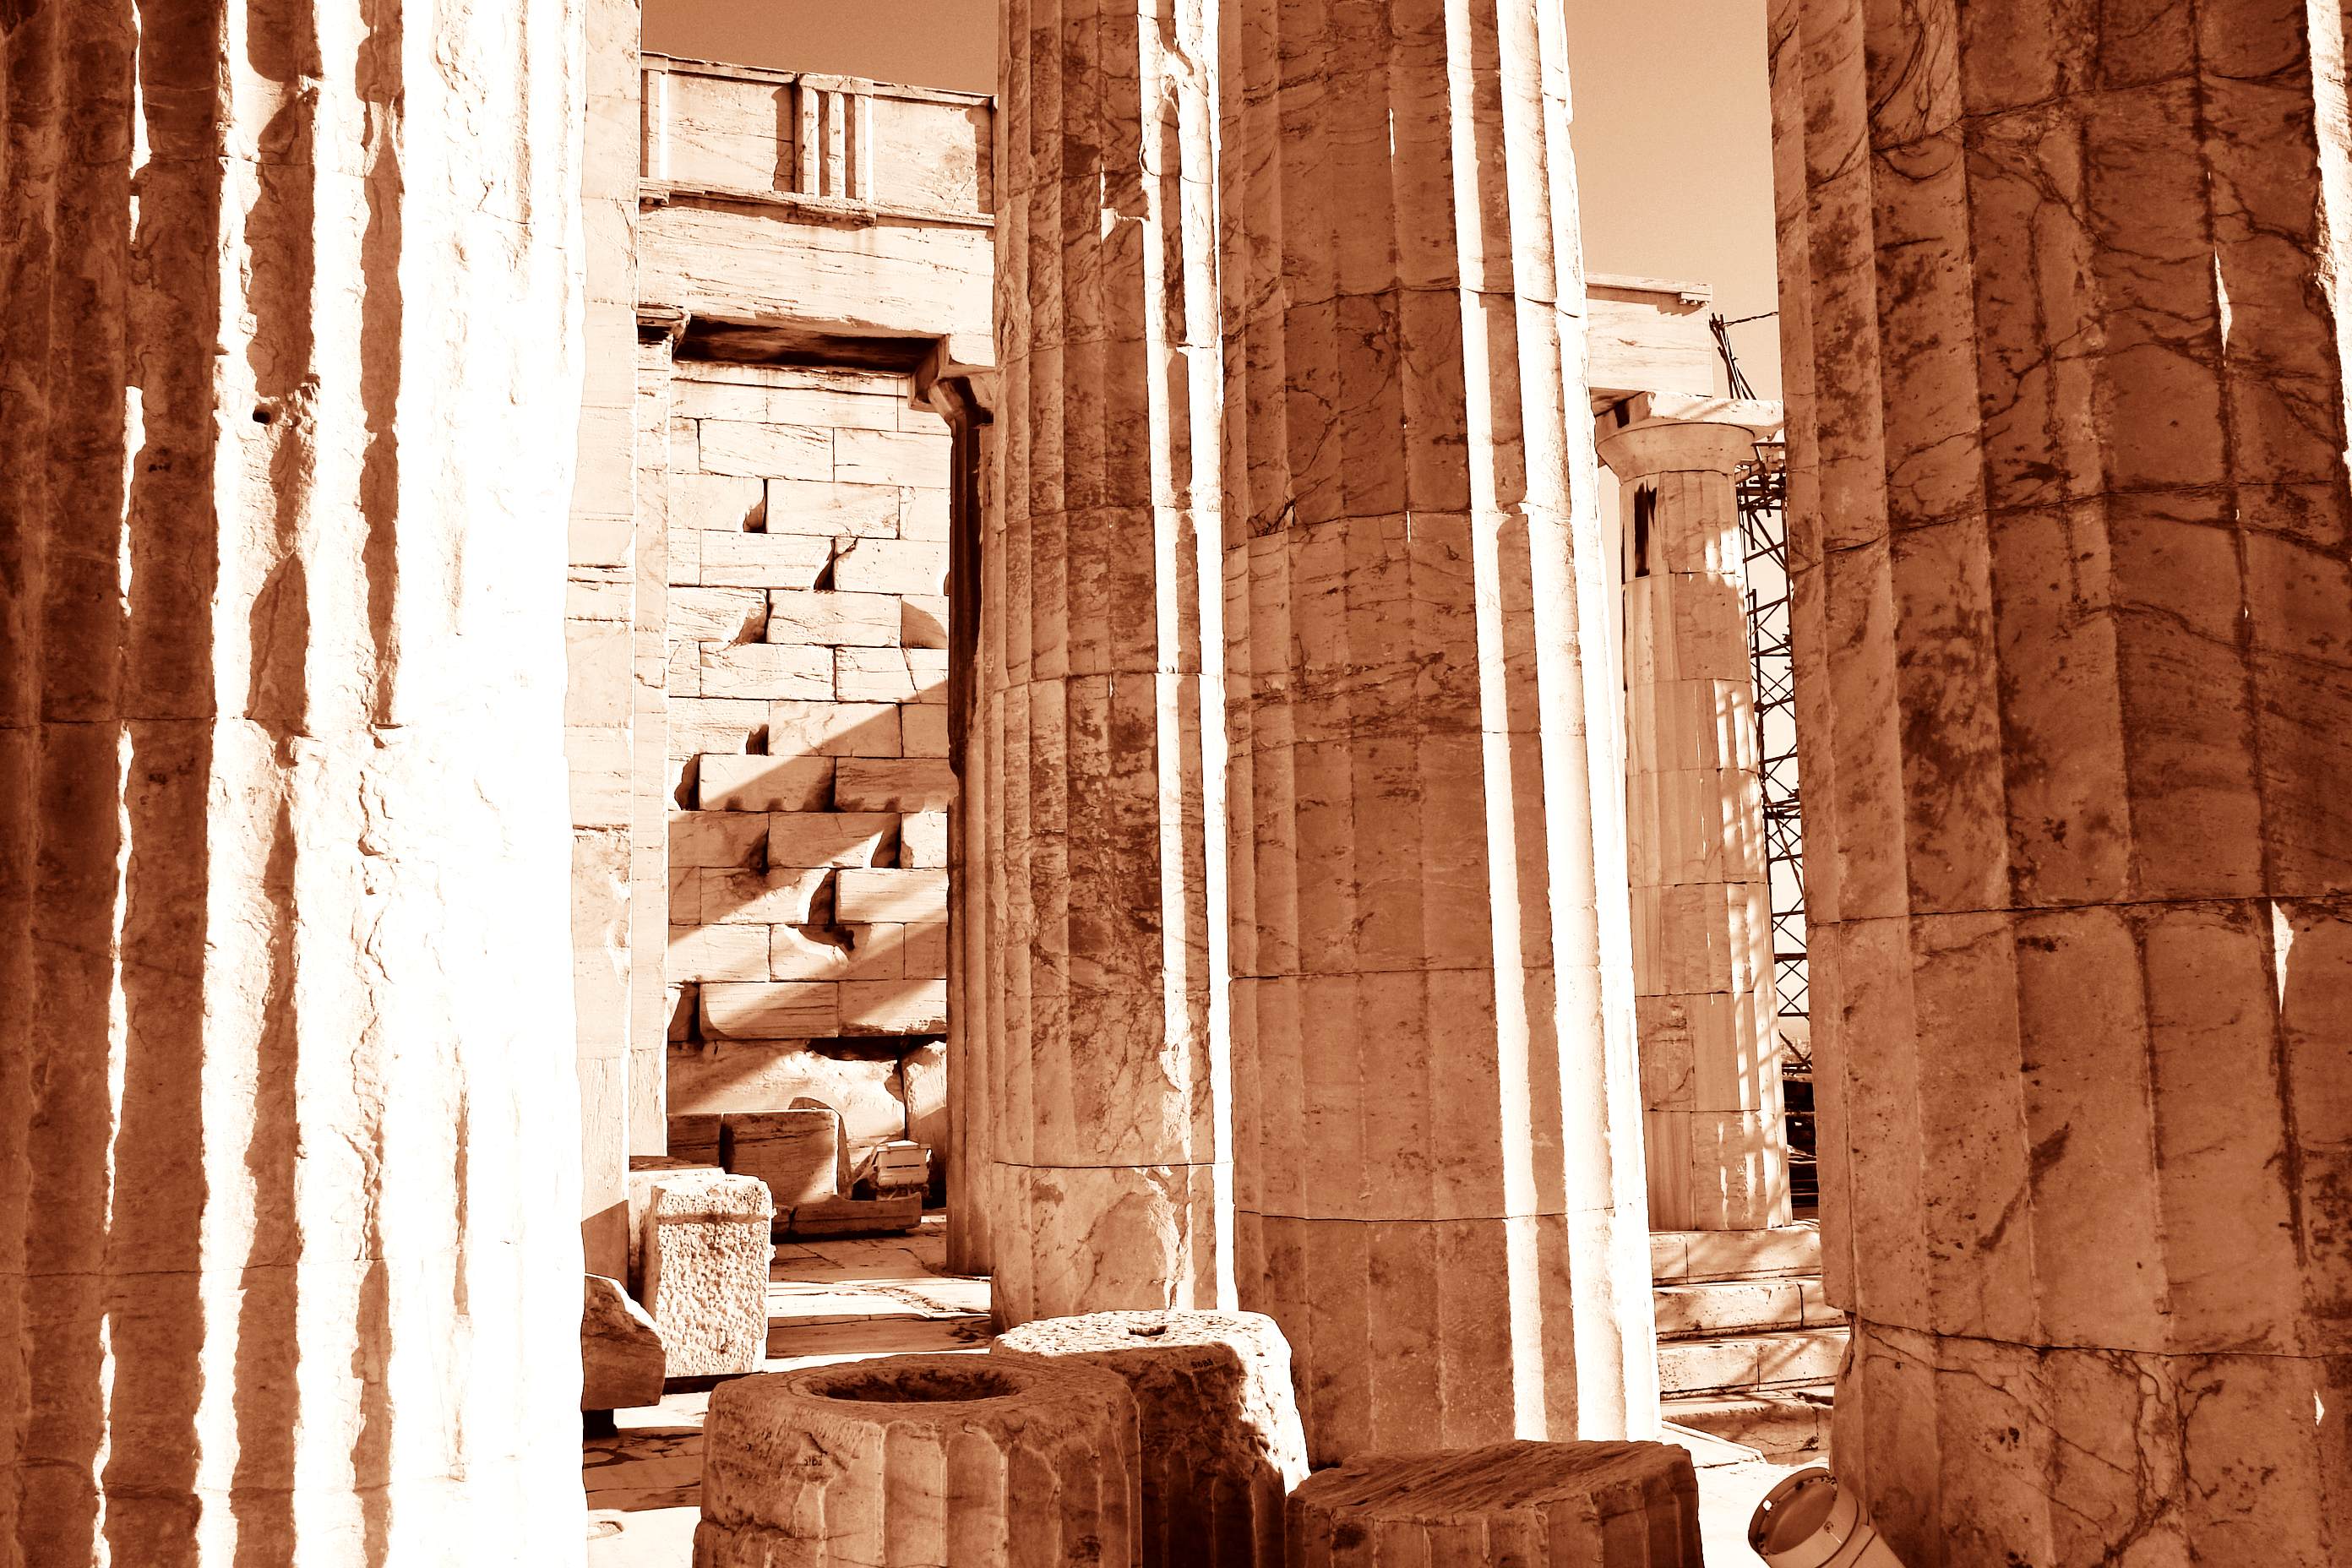 The Parthenon. This image is for SALE!